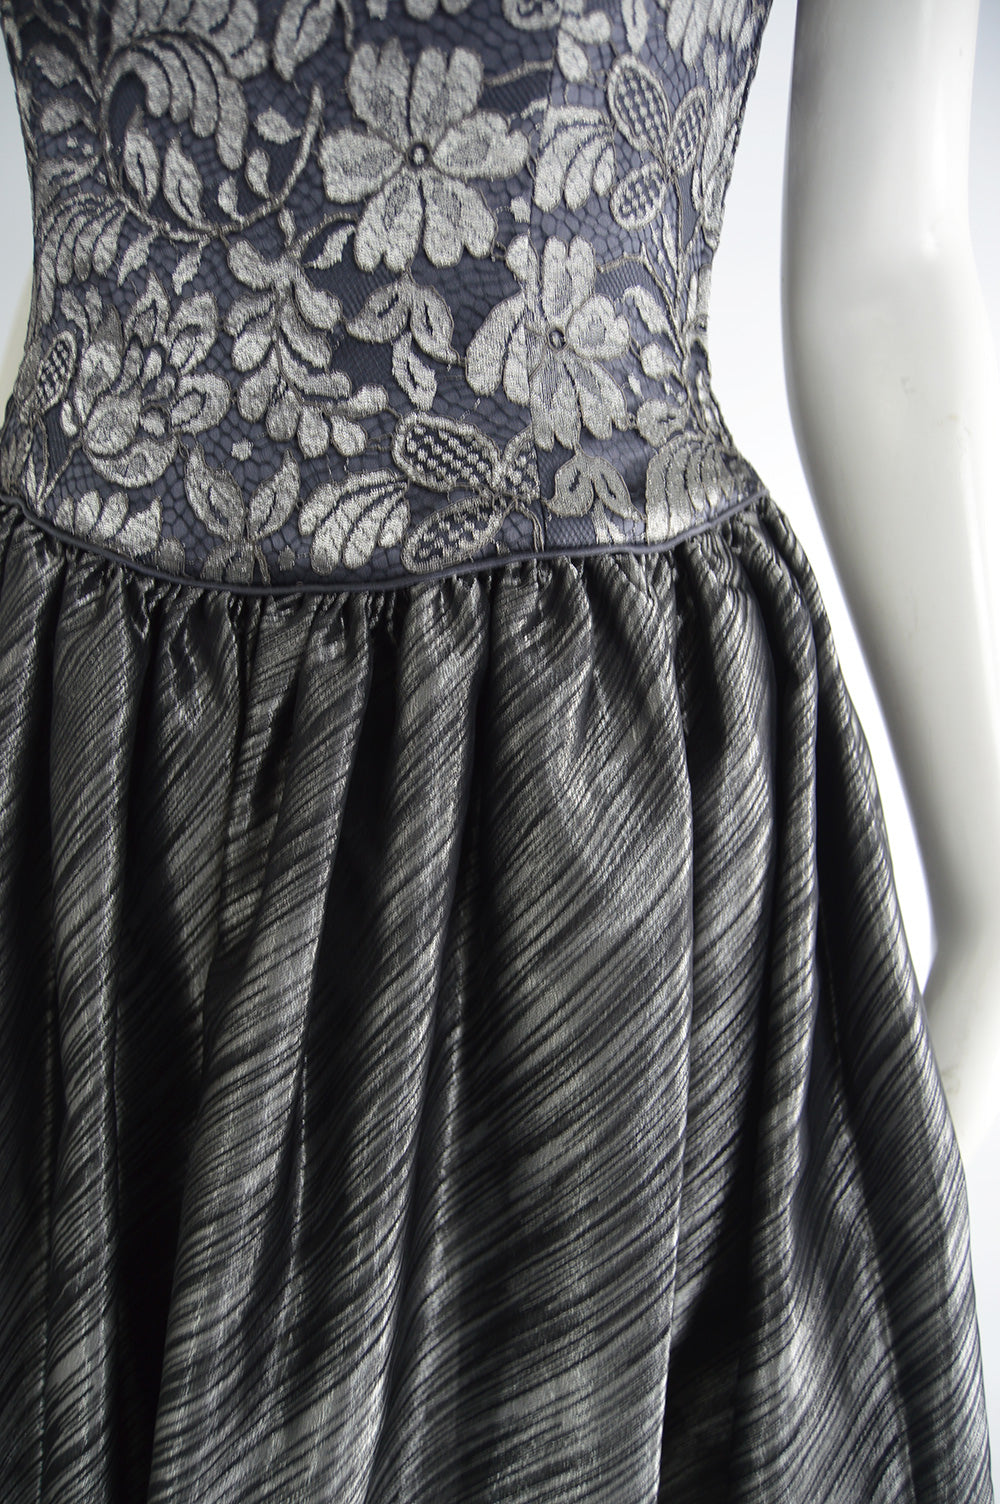 Vintage Silver Lace & Lamé Full Skirt Evening Gown